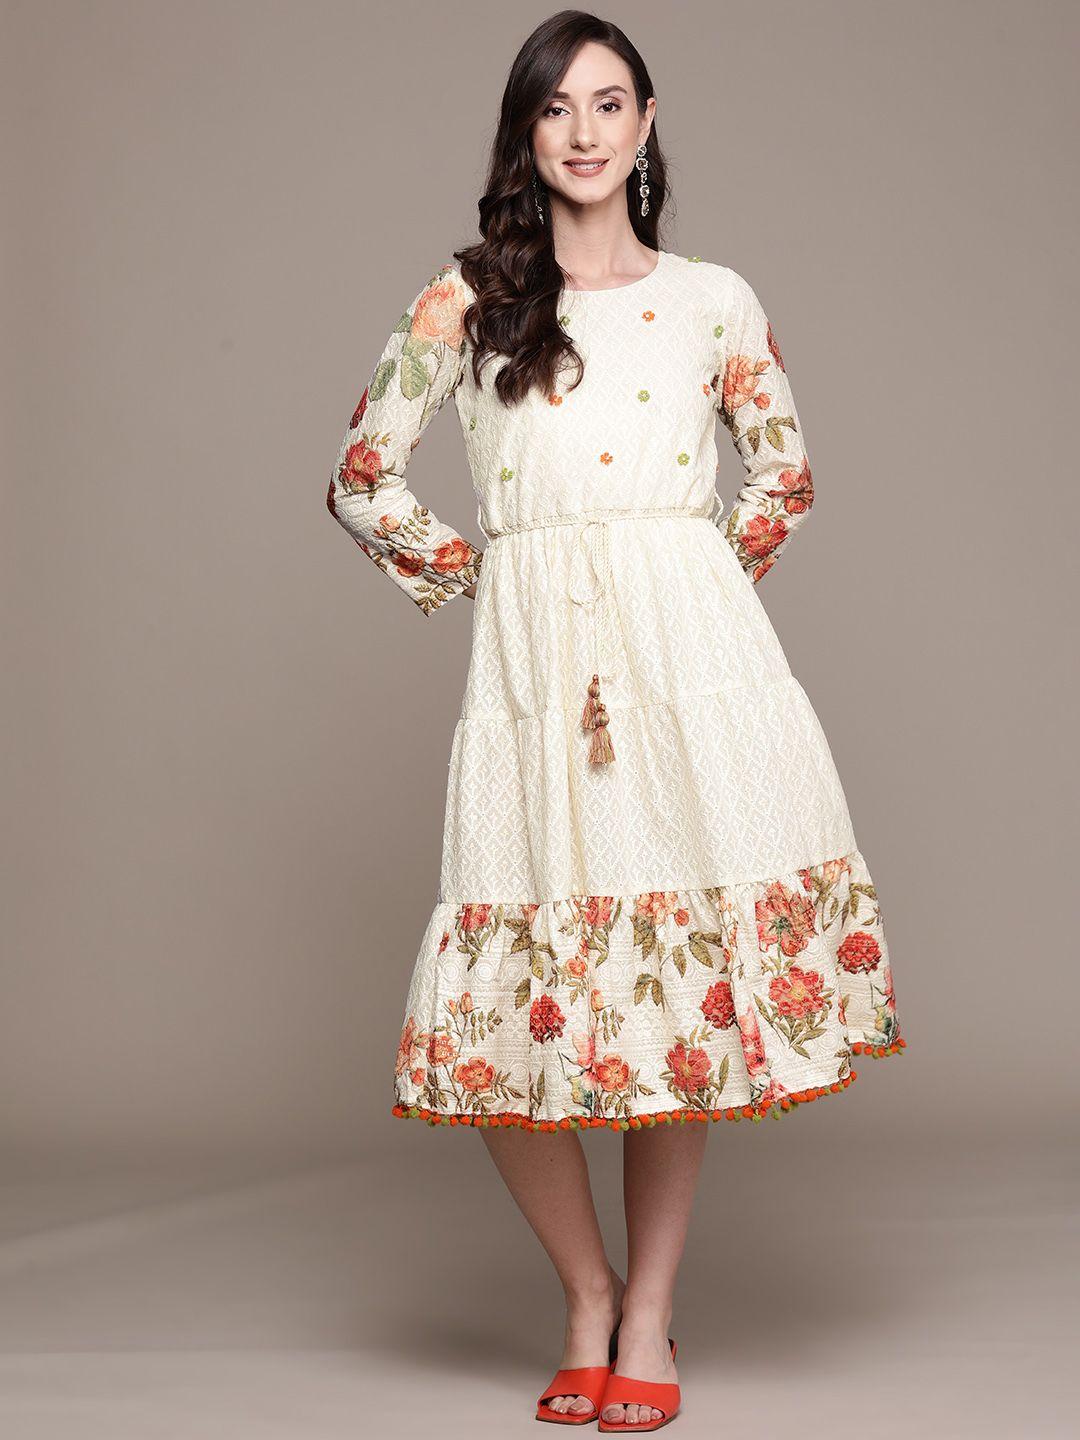 ishin-white-&-red-floral-embroidered-cotton-a-line-midi-dress